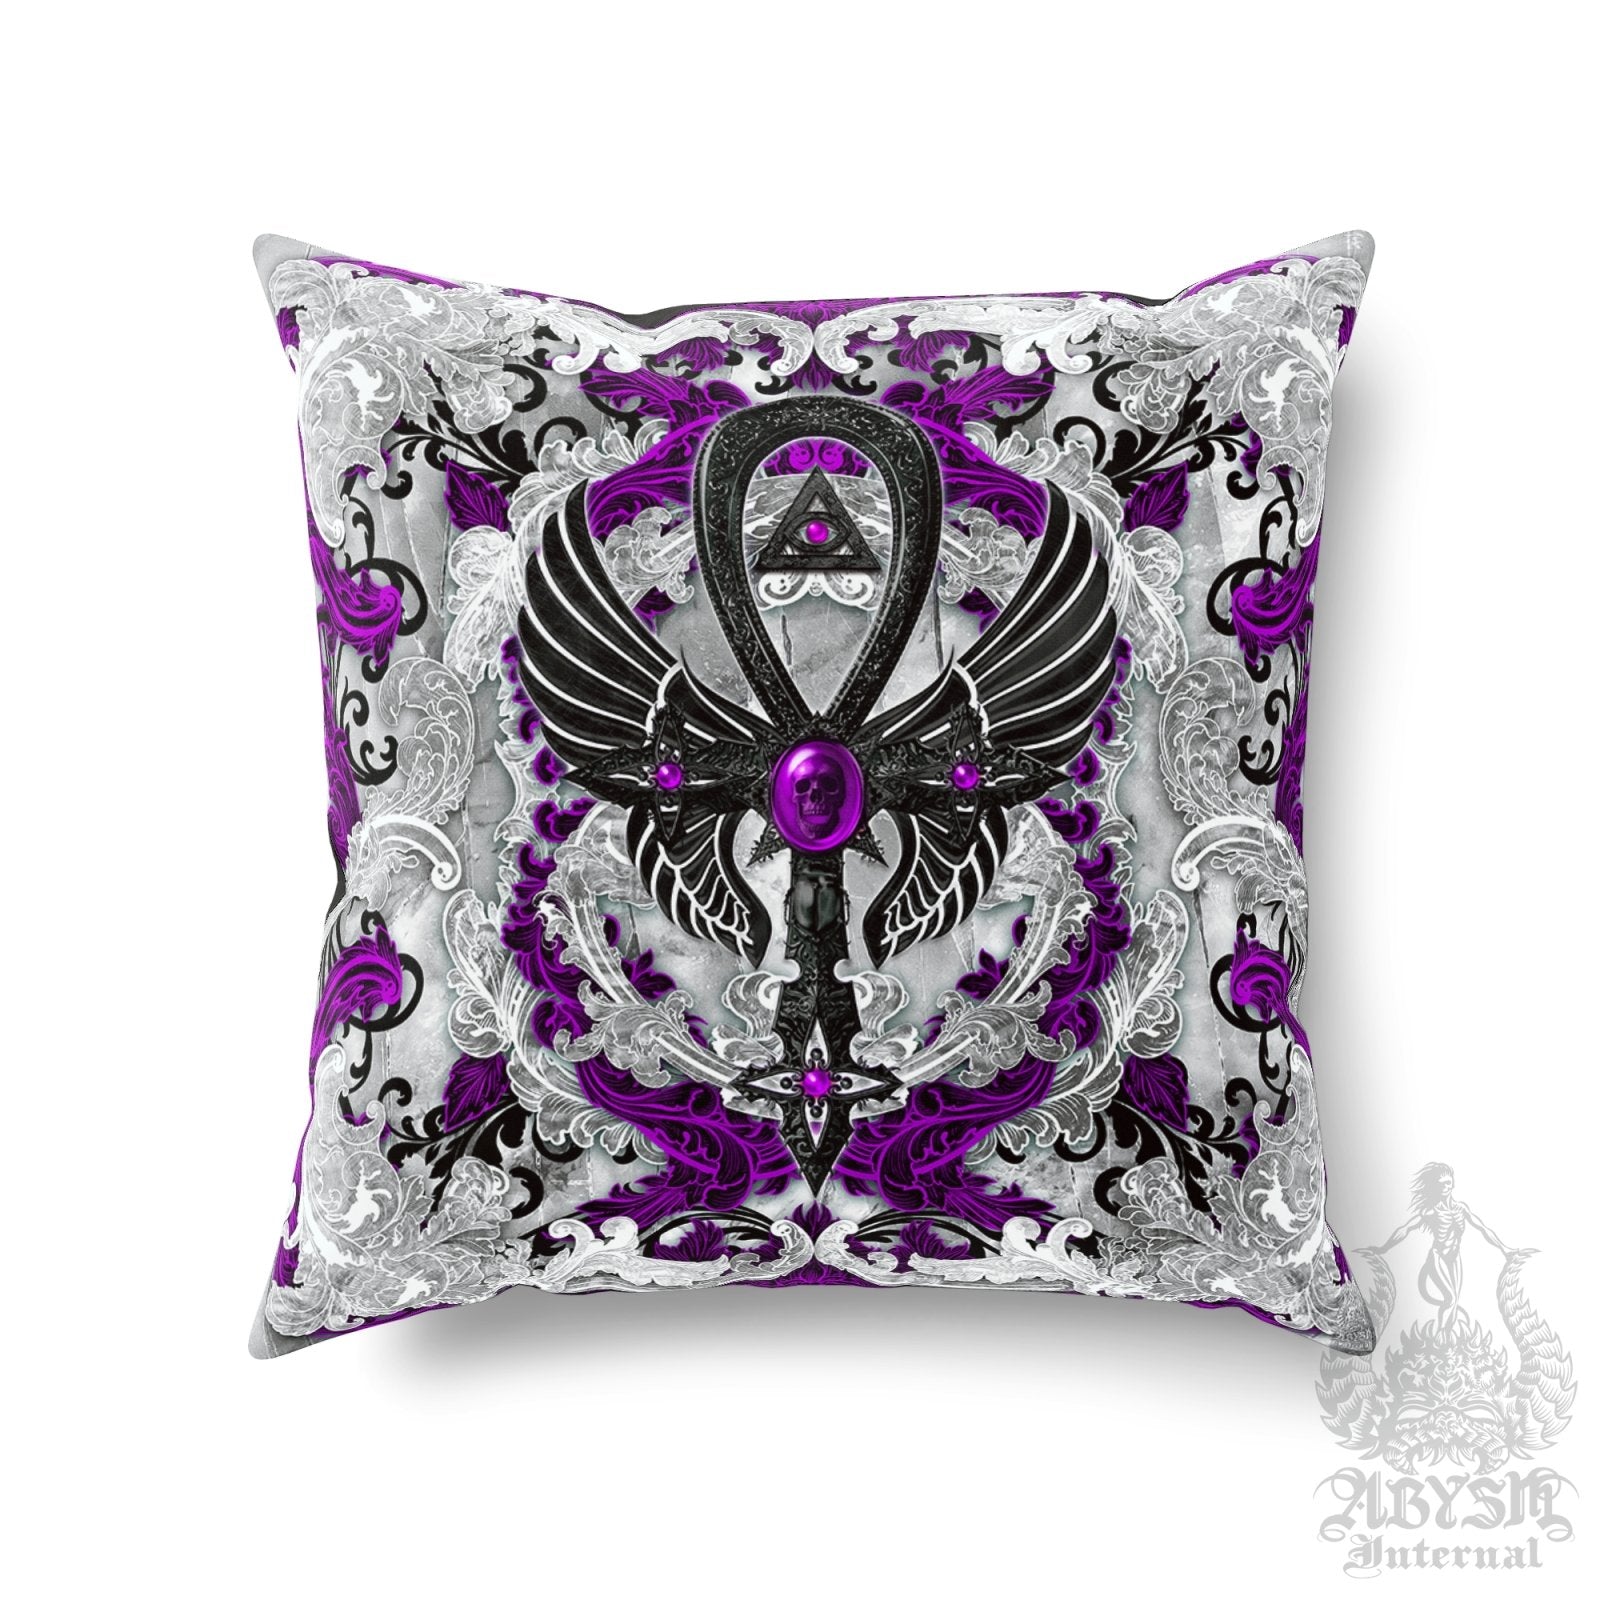 Gothic Throw Pillow, Decorative Accent Cushion, Occult Home Decor, Dark Art, Alternative Room - Ankh Cross, Pastel and White Goth - Abysm Internal